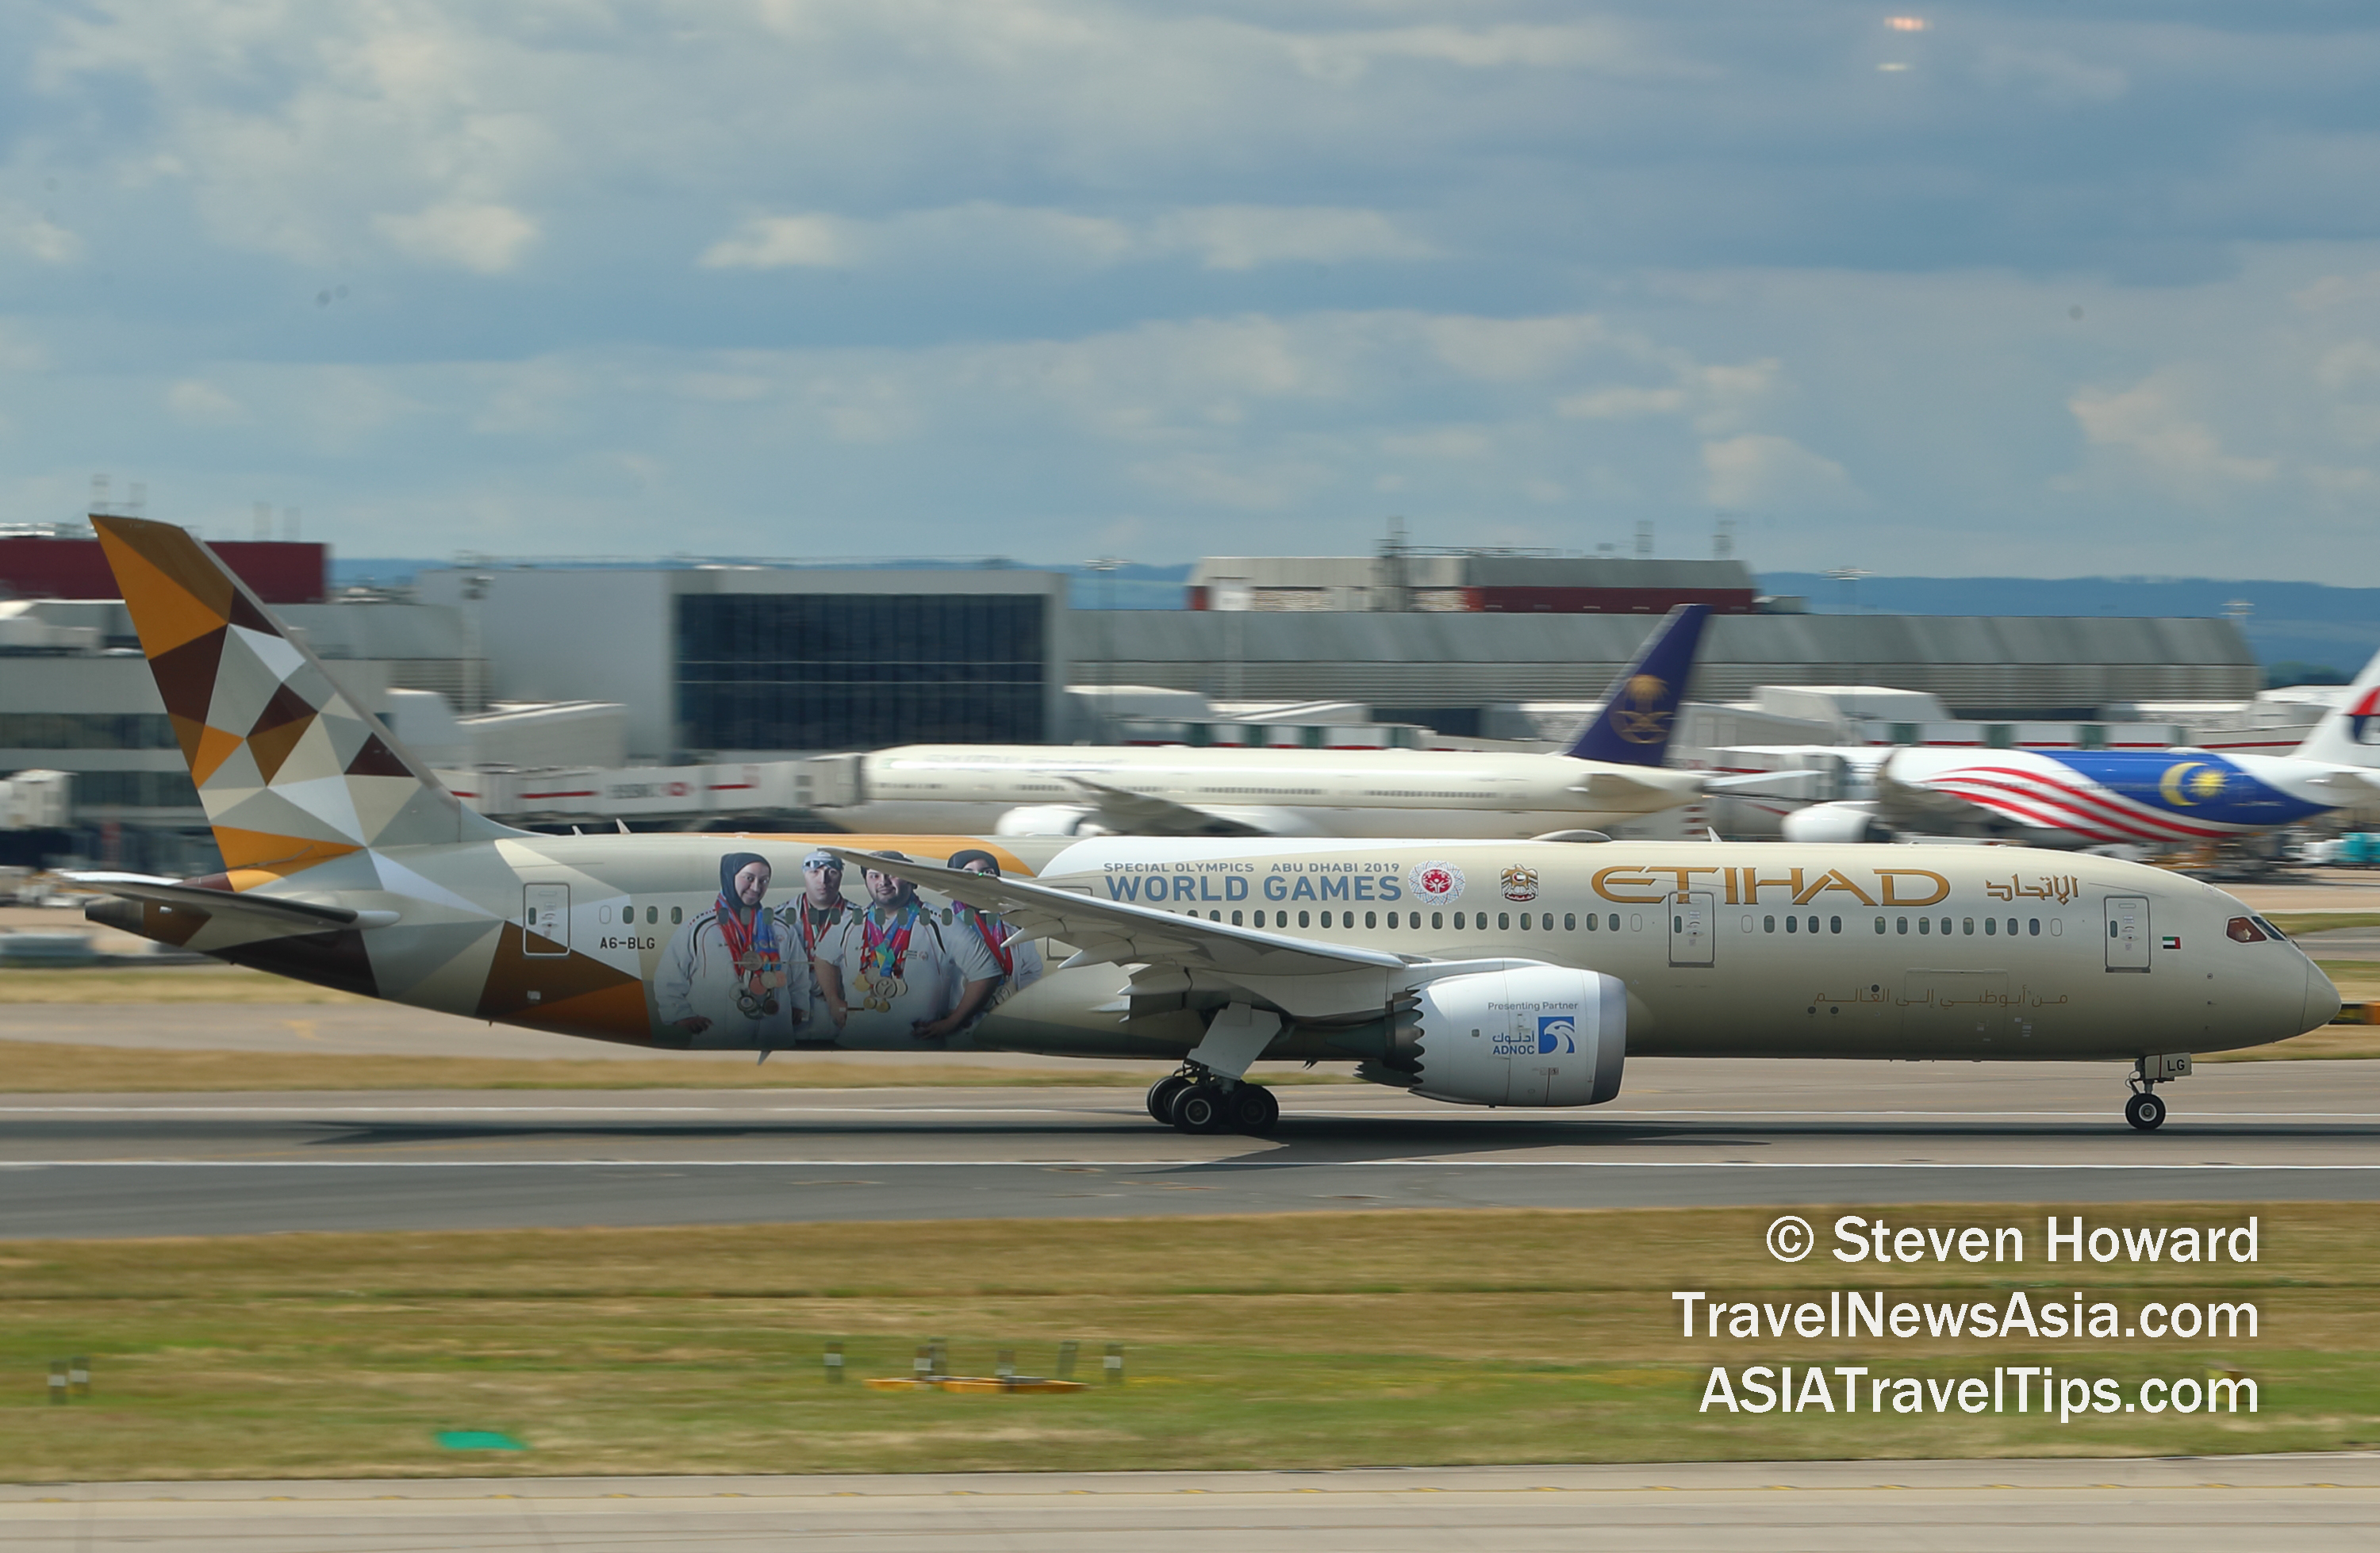 Etihad Airways Boeing 787-9 reg: A6-BLG. Picture by Steven Howard of TravelNewsAsia.com Click to enlarge.